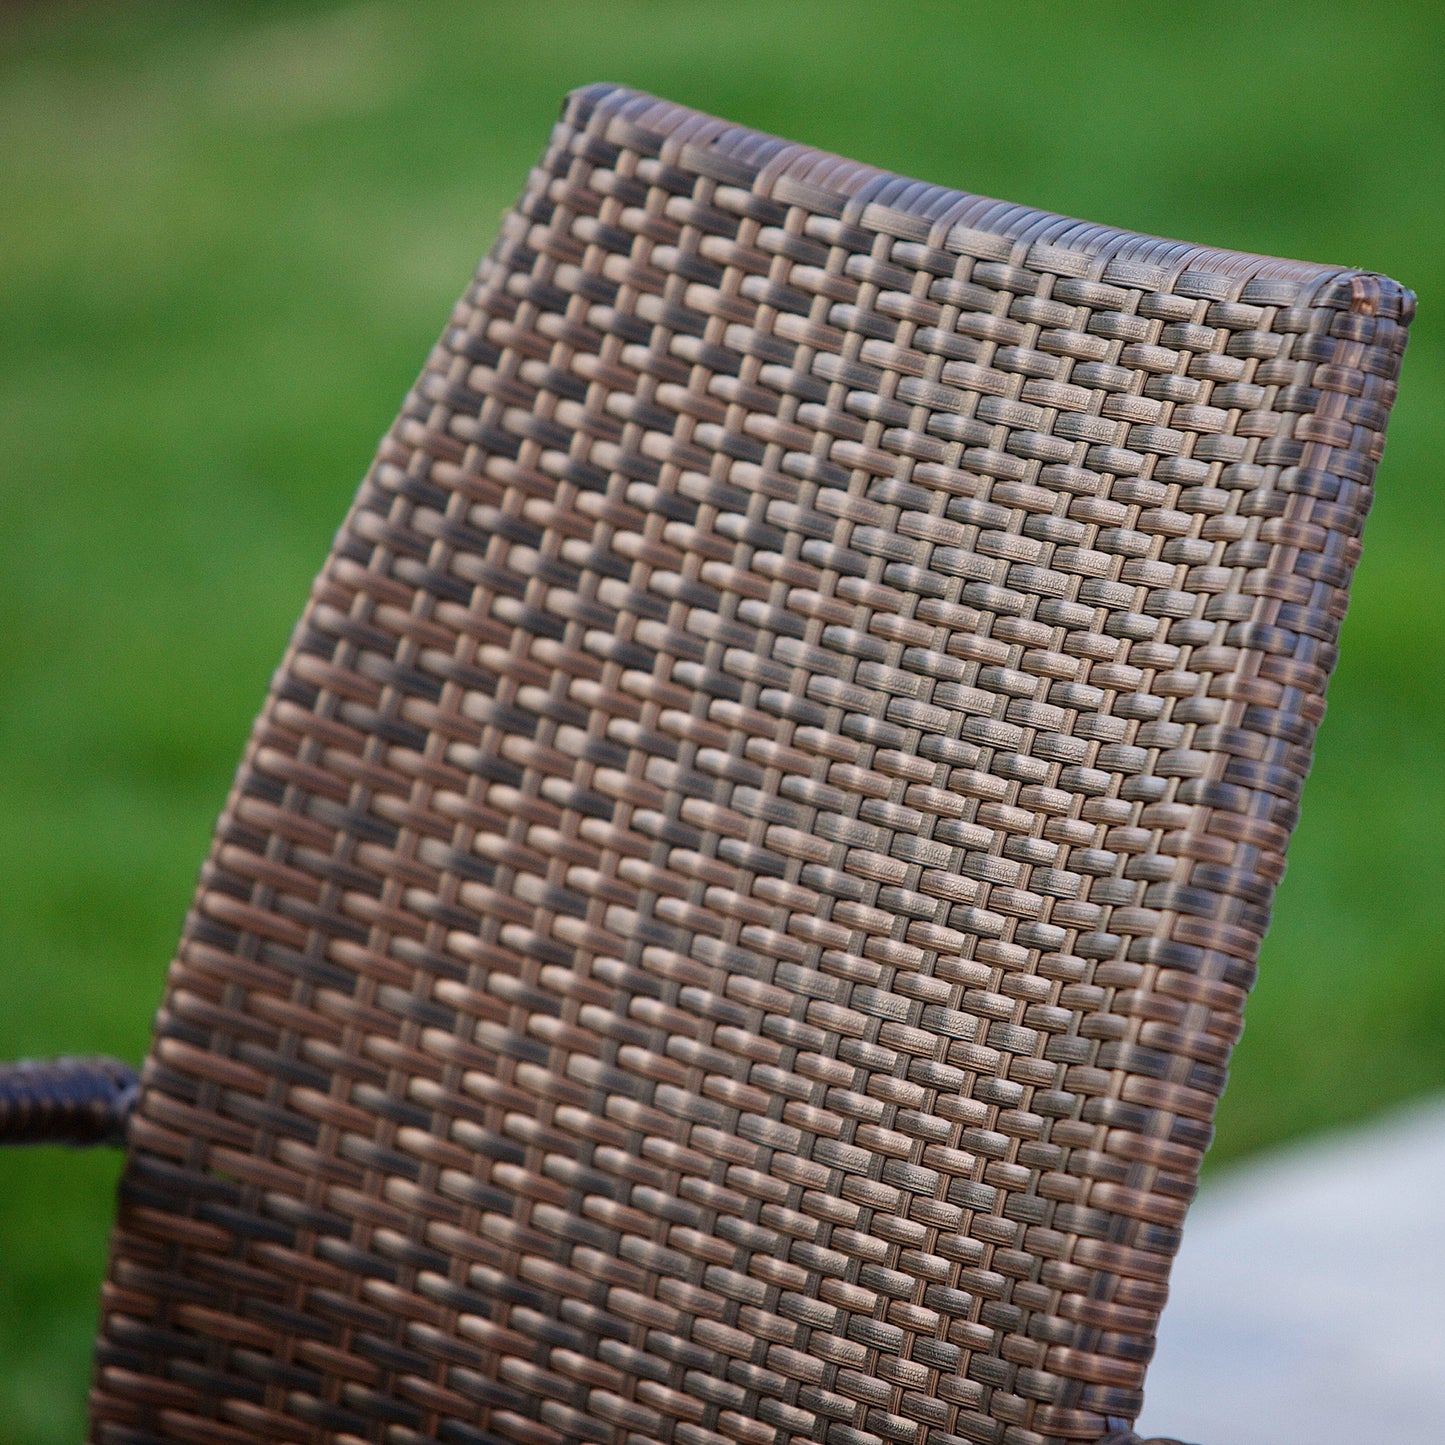 Michael Outdoor Stacking Multi-Brown Wicker Chairs (Set of 2)